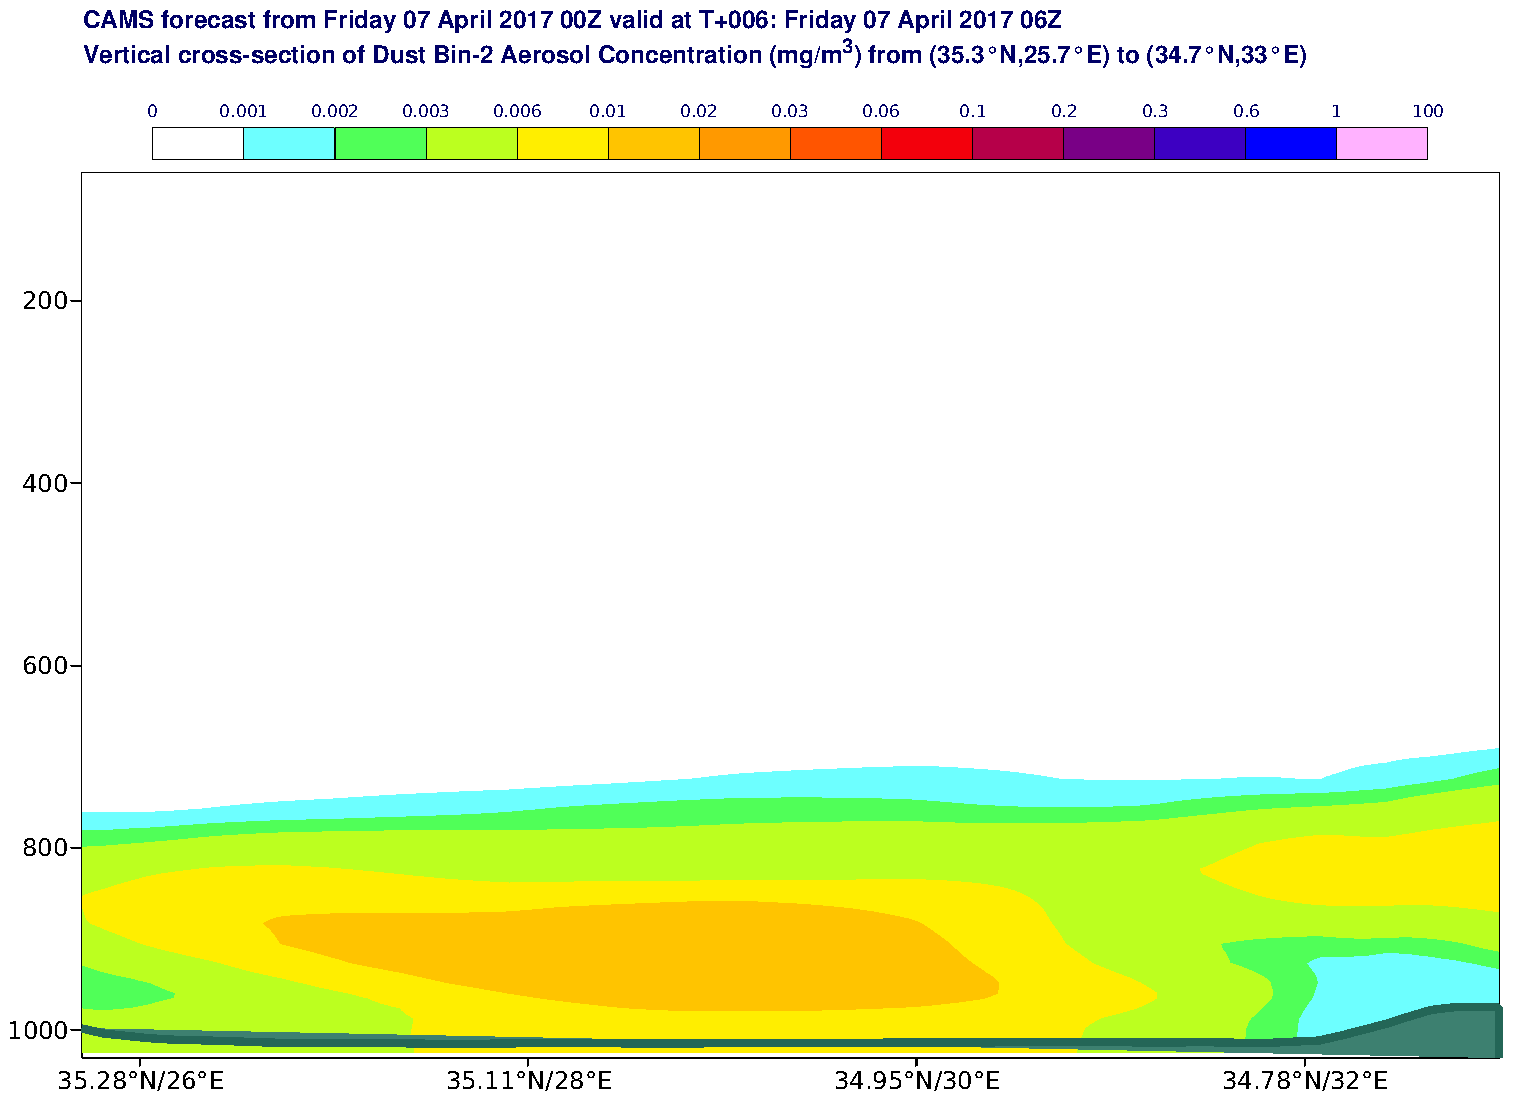 Vertical cross-section of Dust Bin-2 Aerosol Concentration (mg/m3) valid at T6 - 2017-04-07 06:00